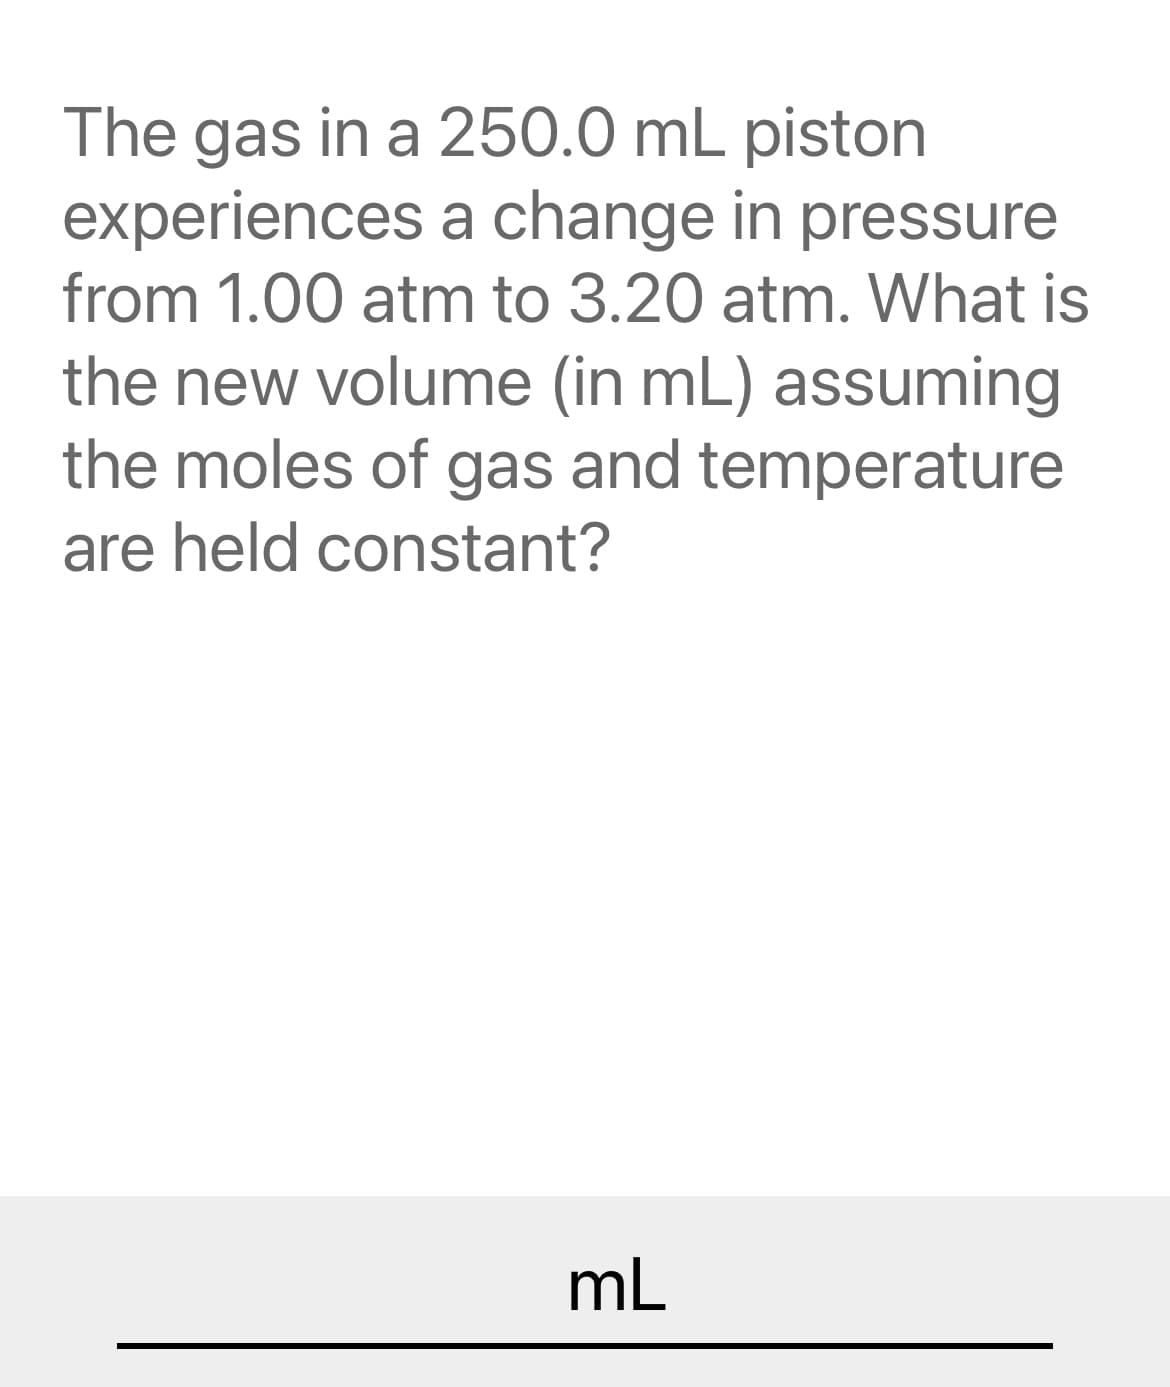 The gas in a 250.0 mL piston
experiences a change in pressure
from 1.00 atm to 3.20 atm. What is
the new volume (in mL) assuming
the moles of gas and temperature
are held constant?
mL